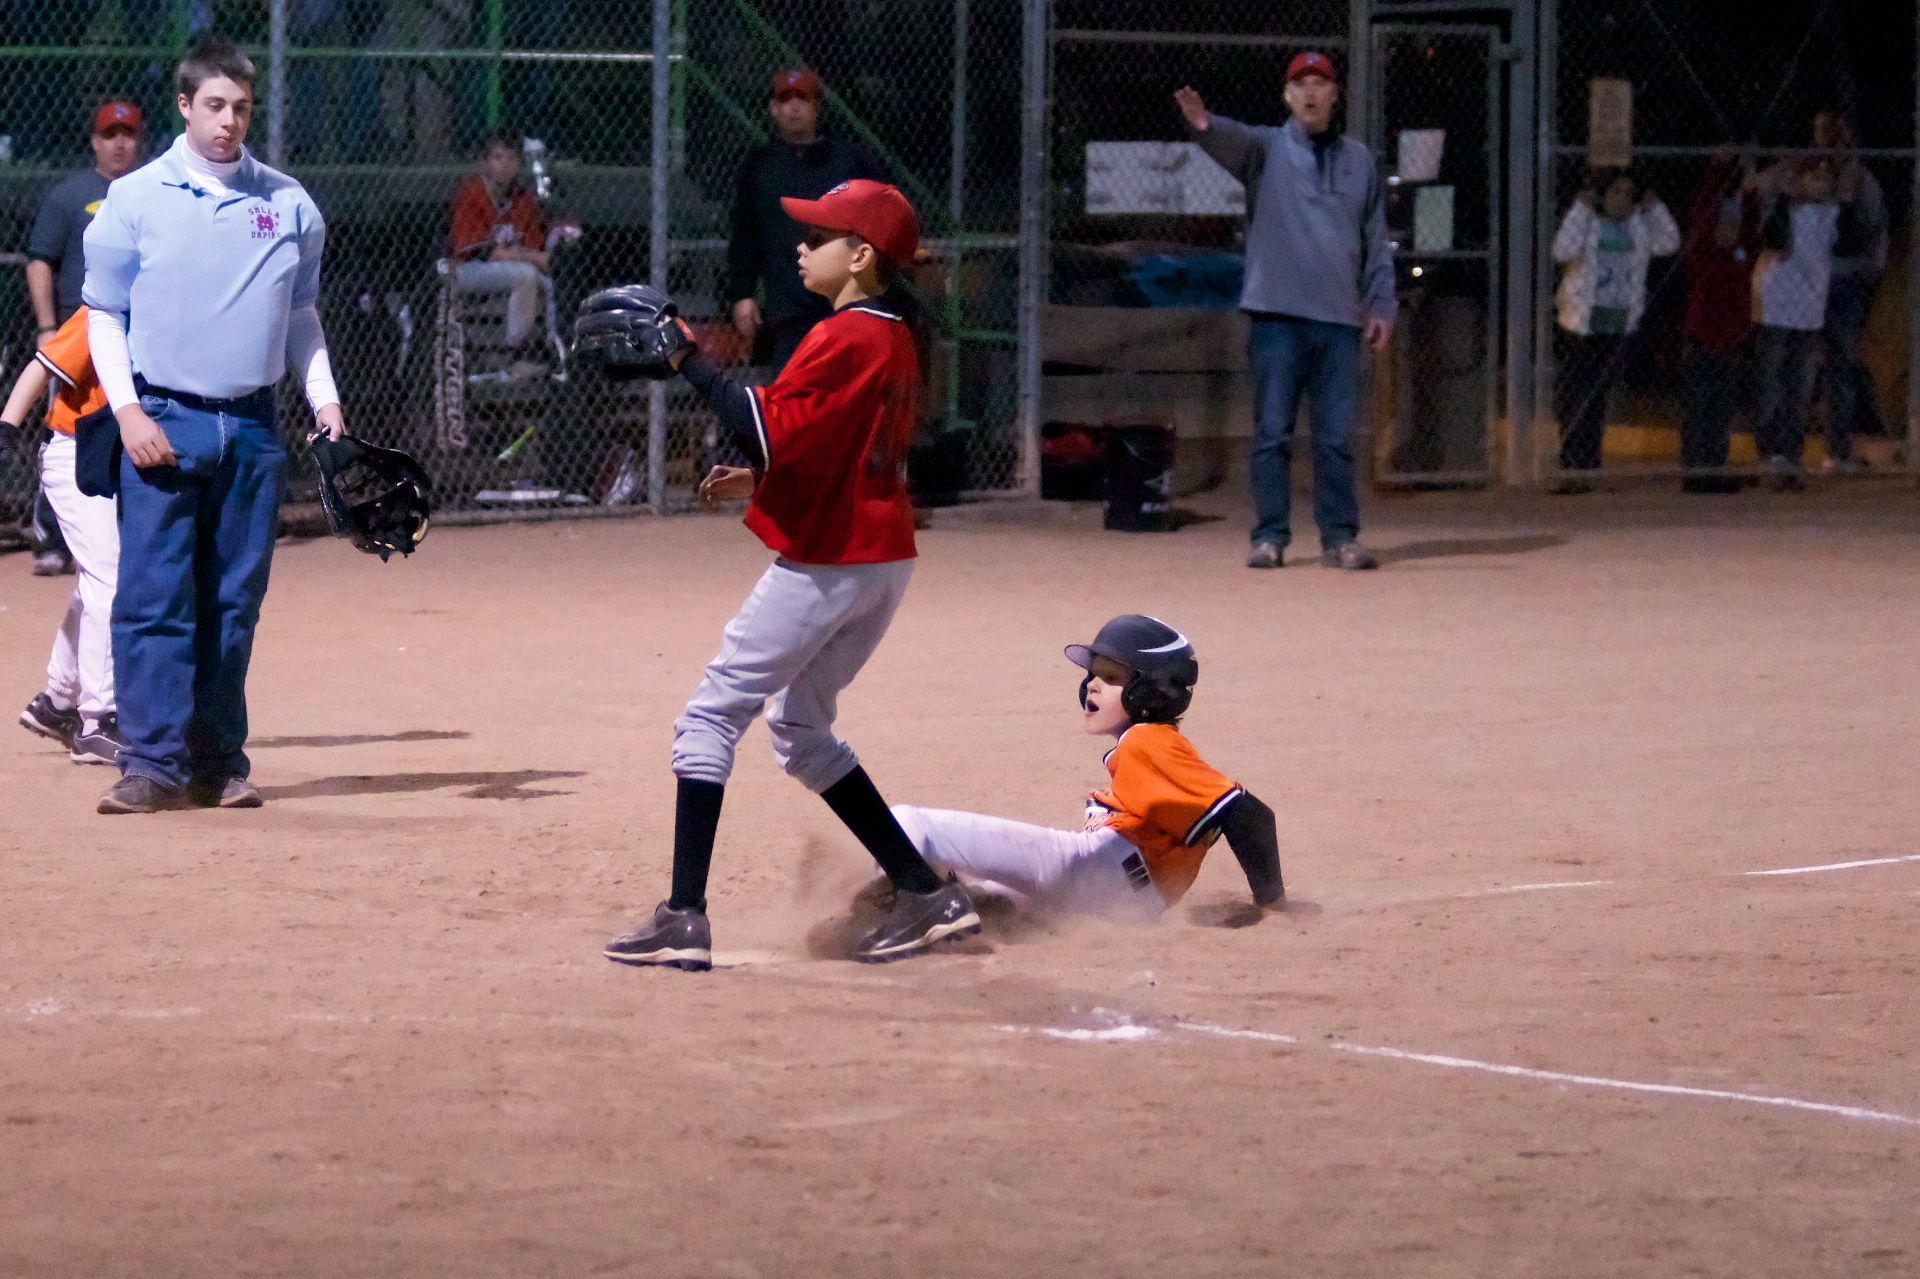 the young child tries to slide into home plate